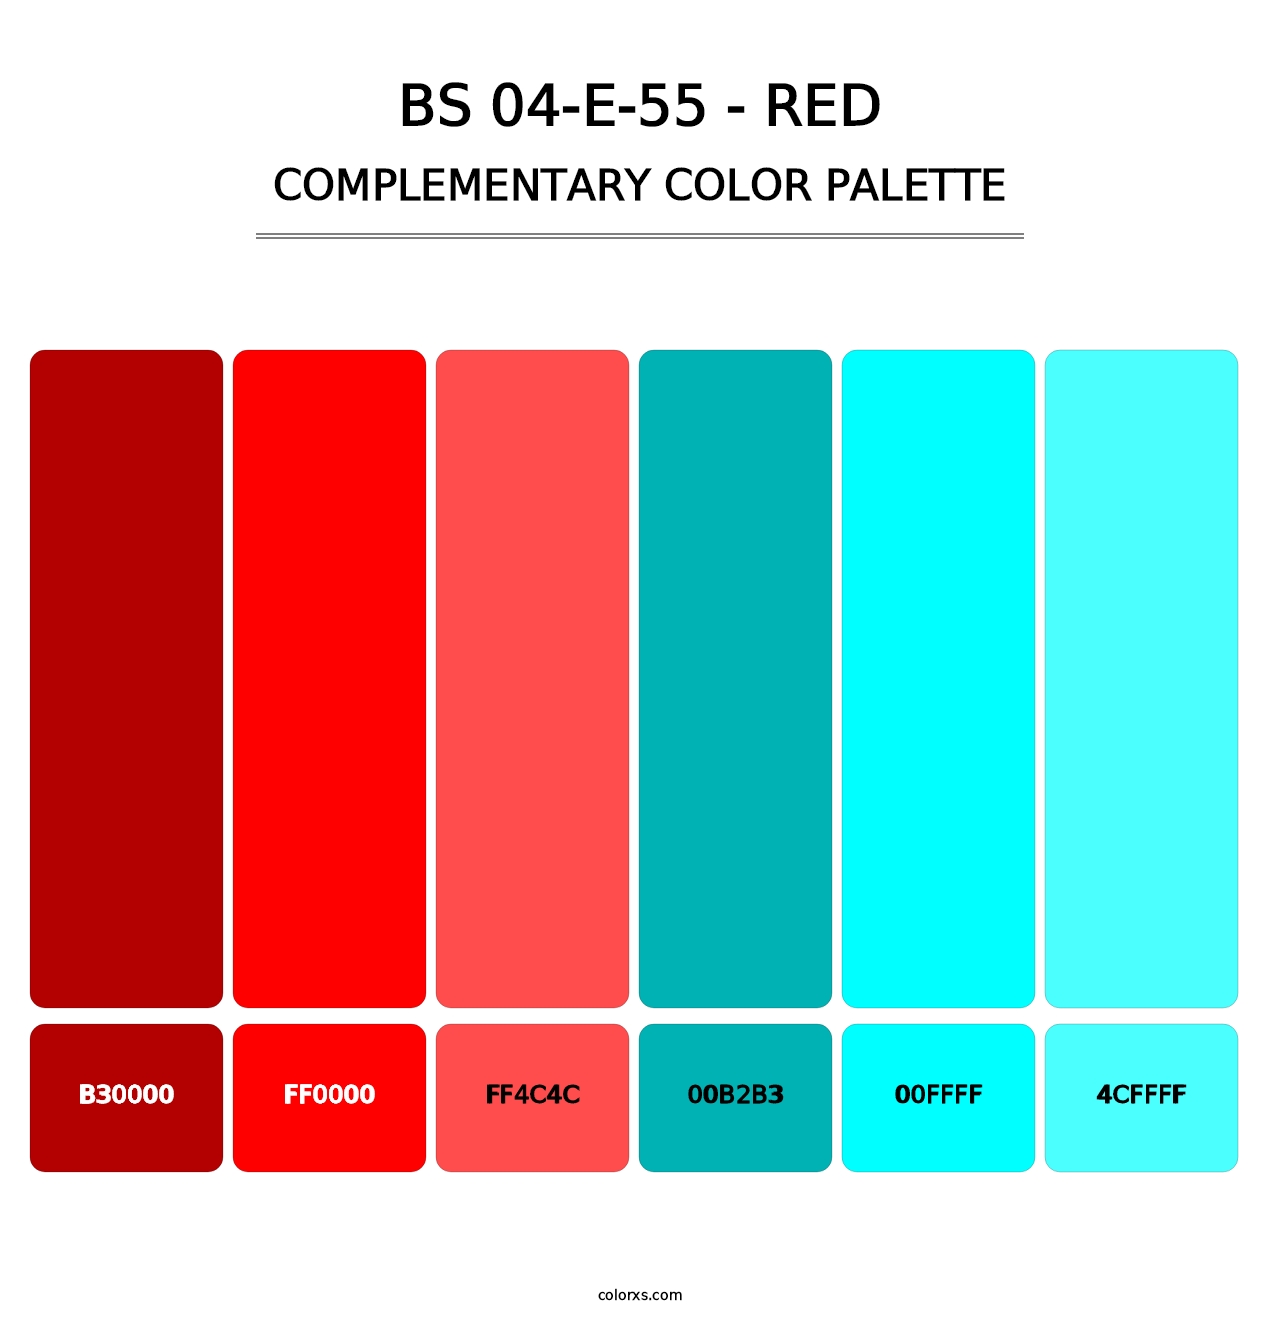 BS 04-E-55 - Red - Complementary Color Palette